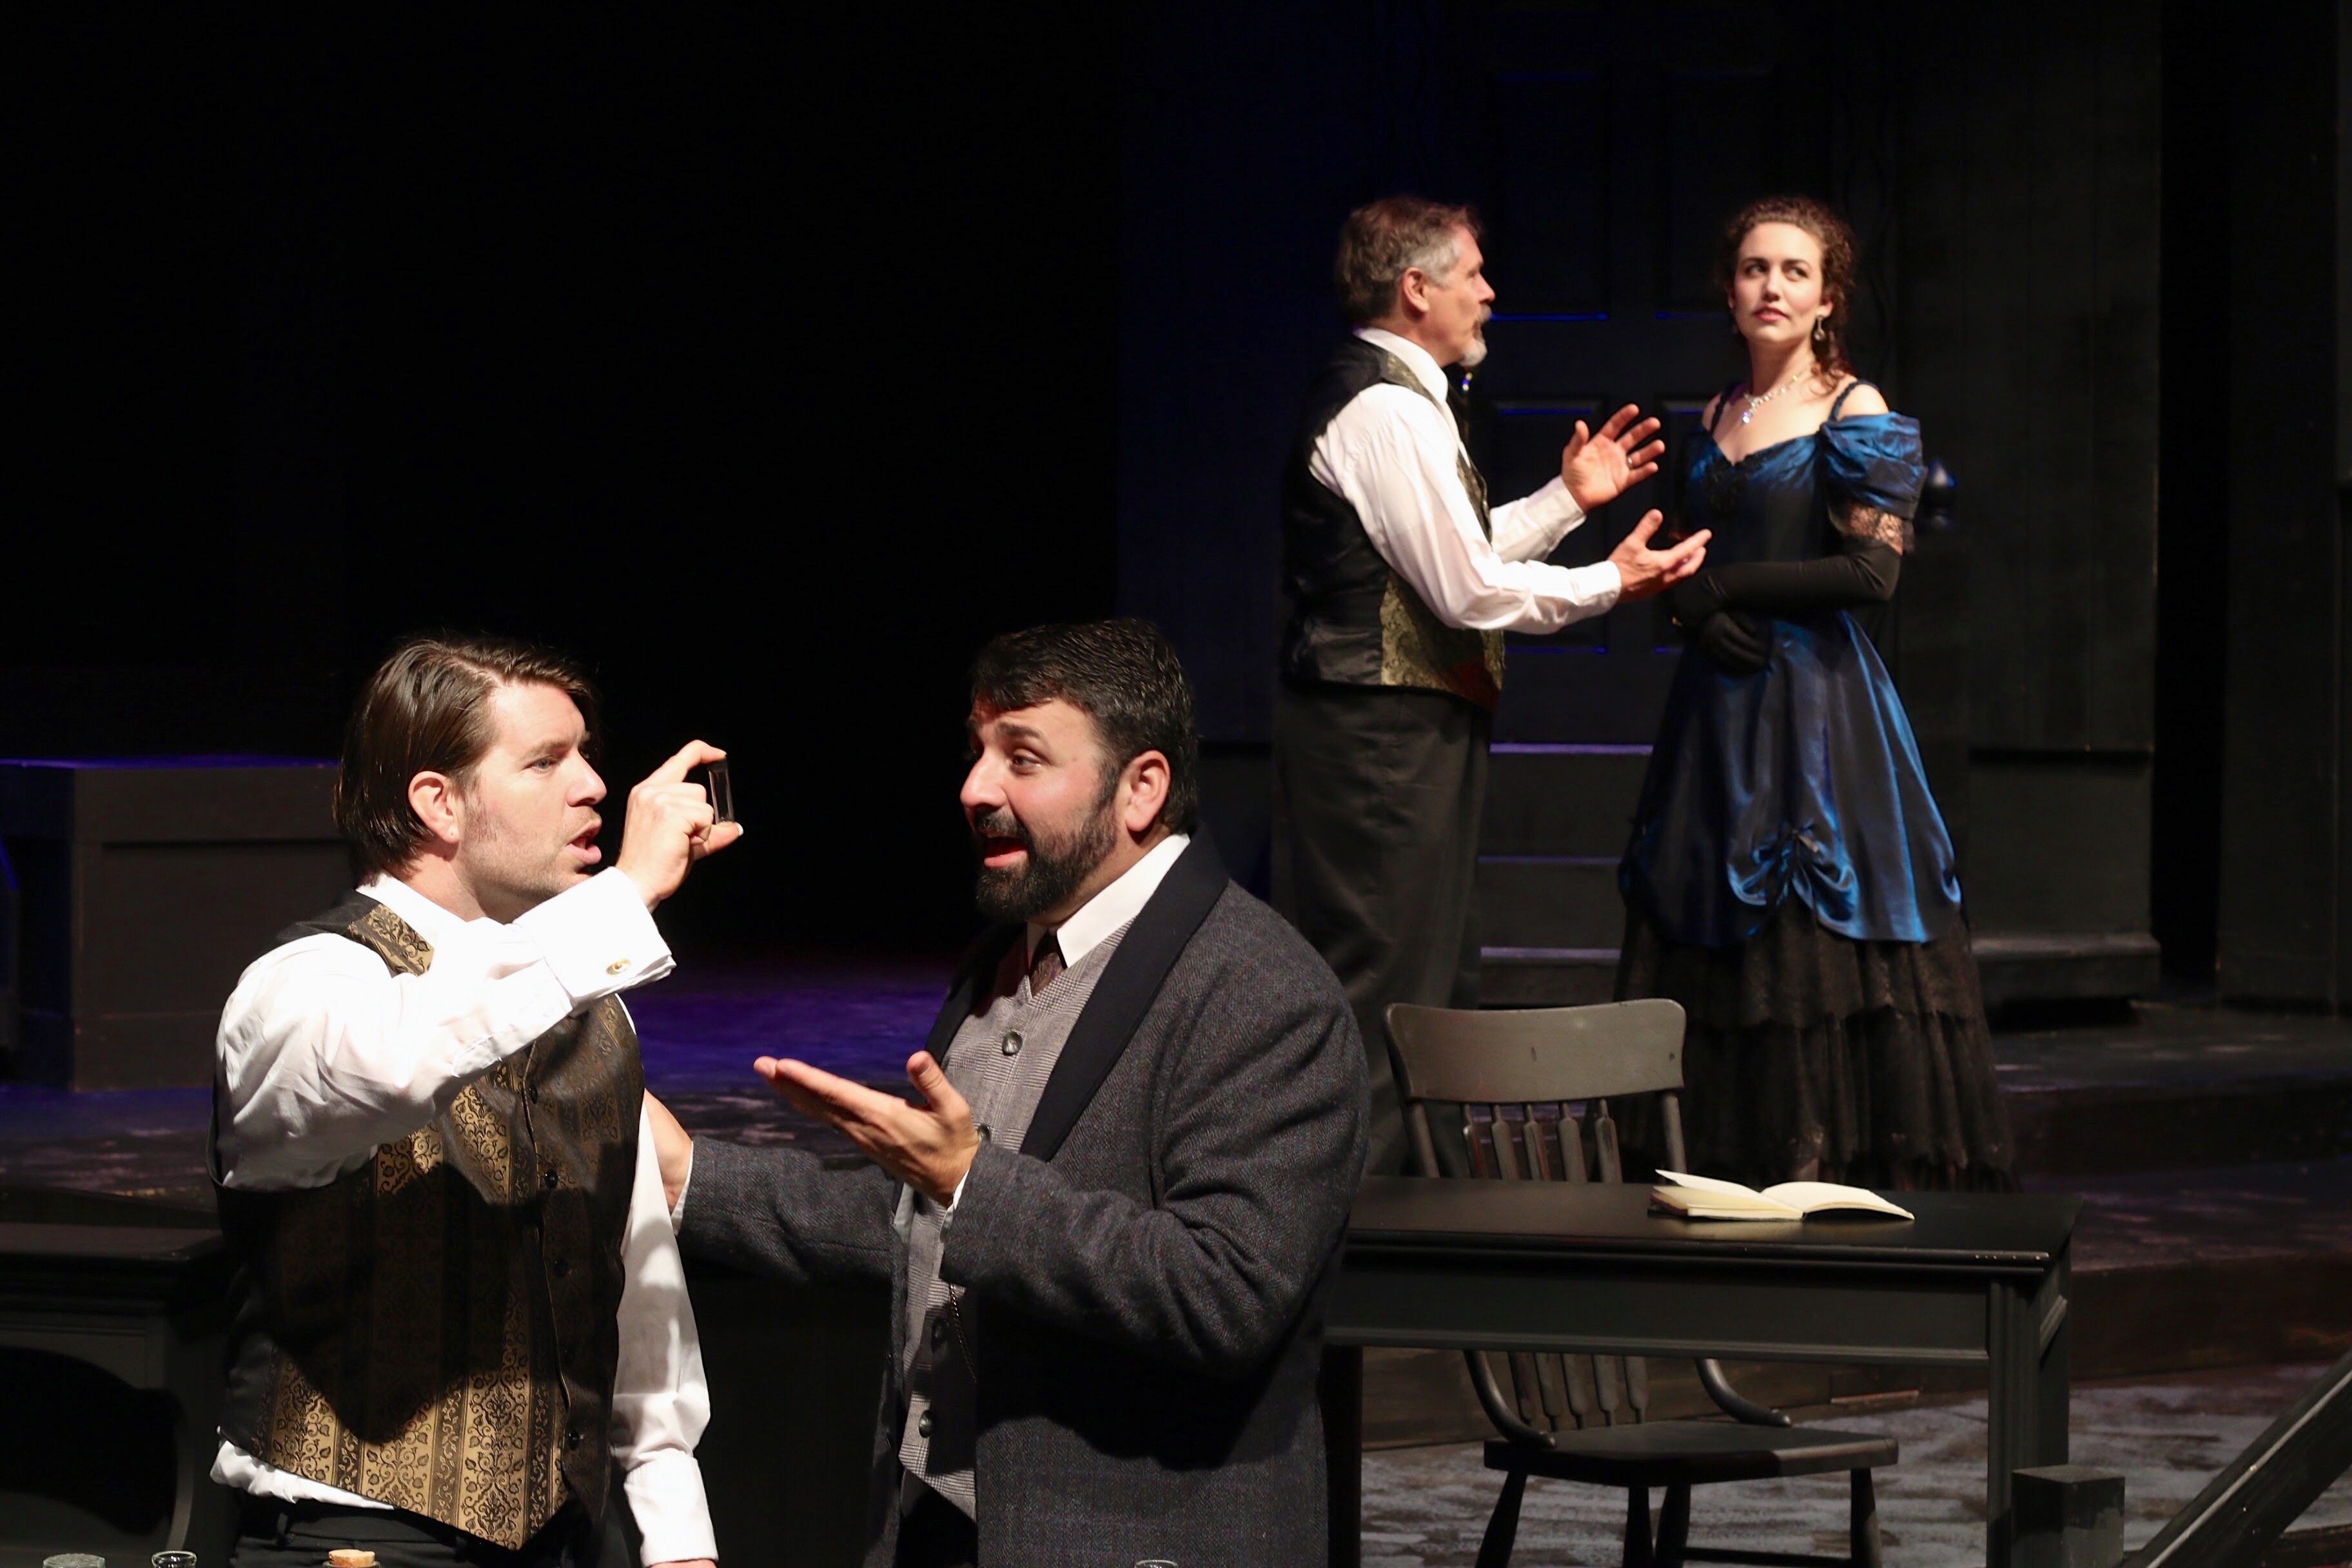 Cottage Grove Theatre overcomes obstacle to innovative casting of title roles in its production of “Jekyll & Hyde”